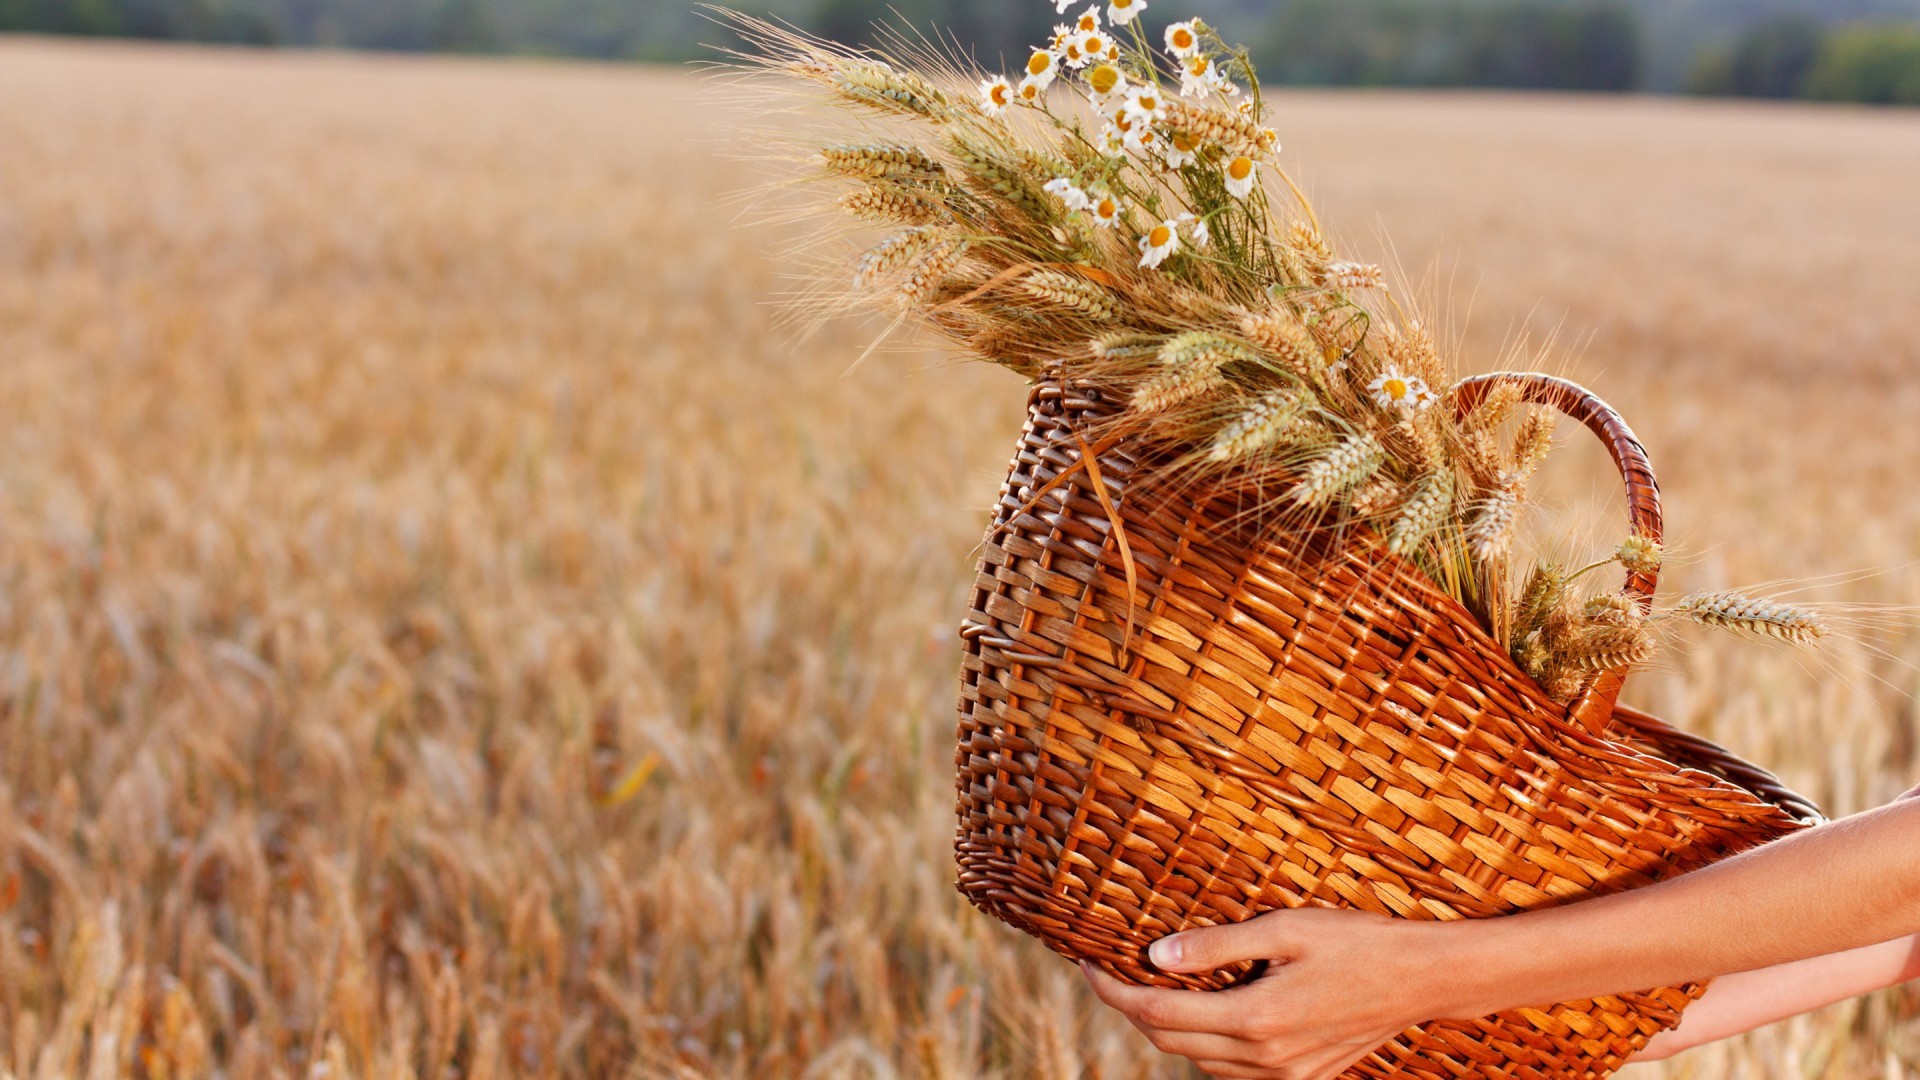 Wallpaper, hands, flowers, field, baskets, straw, wheat, Rye, cereal, barley, autumn, harvest, agriculture, prairie, crop, produce, land plant, flowering plant, grass family, food grain, commodity, maize 1920x1080 Wallpaper